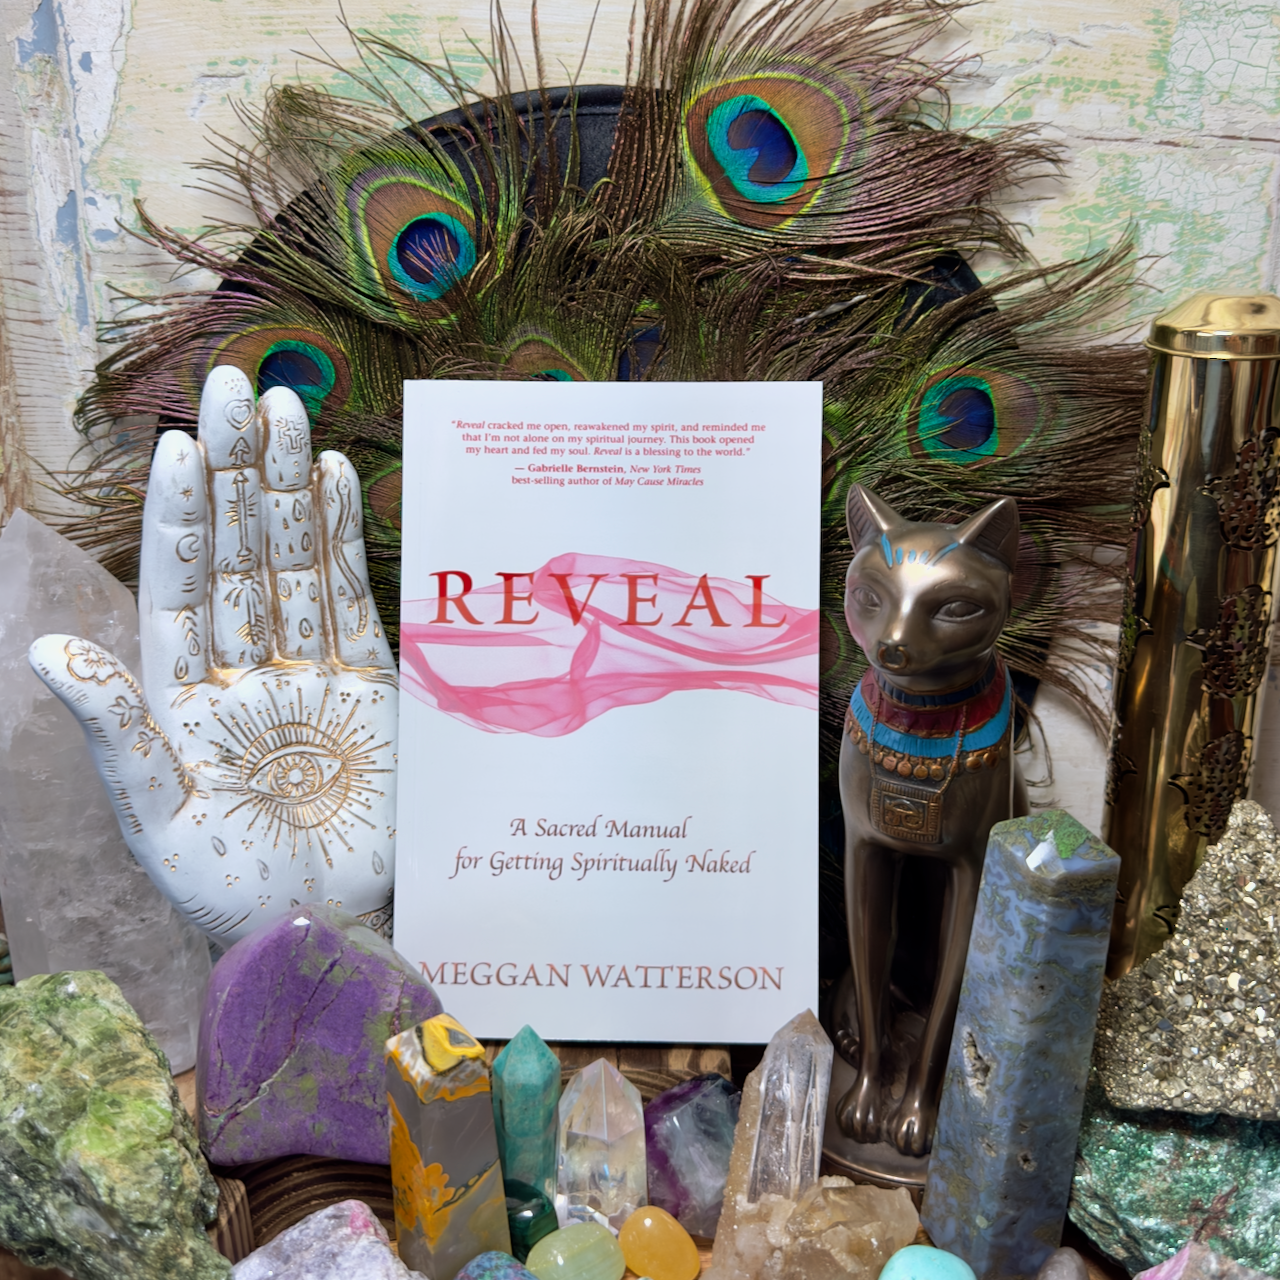 Reveal: A Sacred Manual for Getting Spiritually Naked